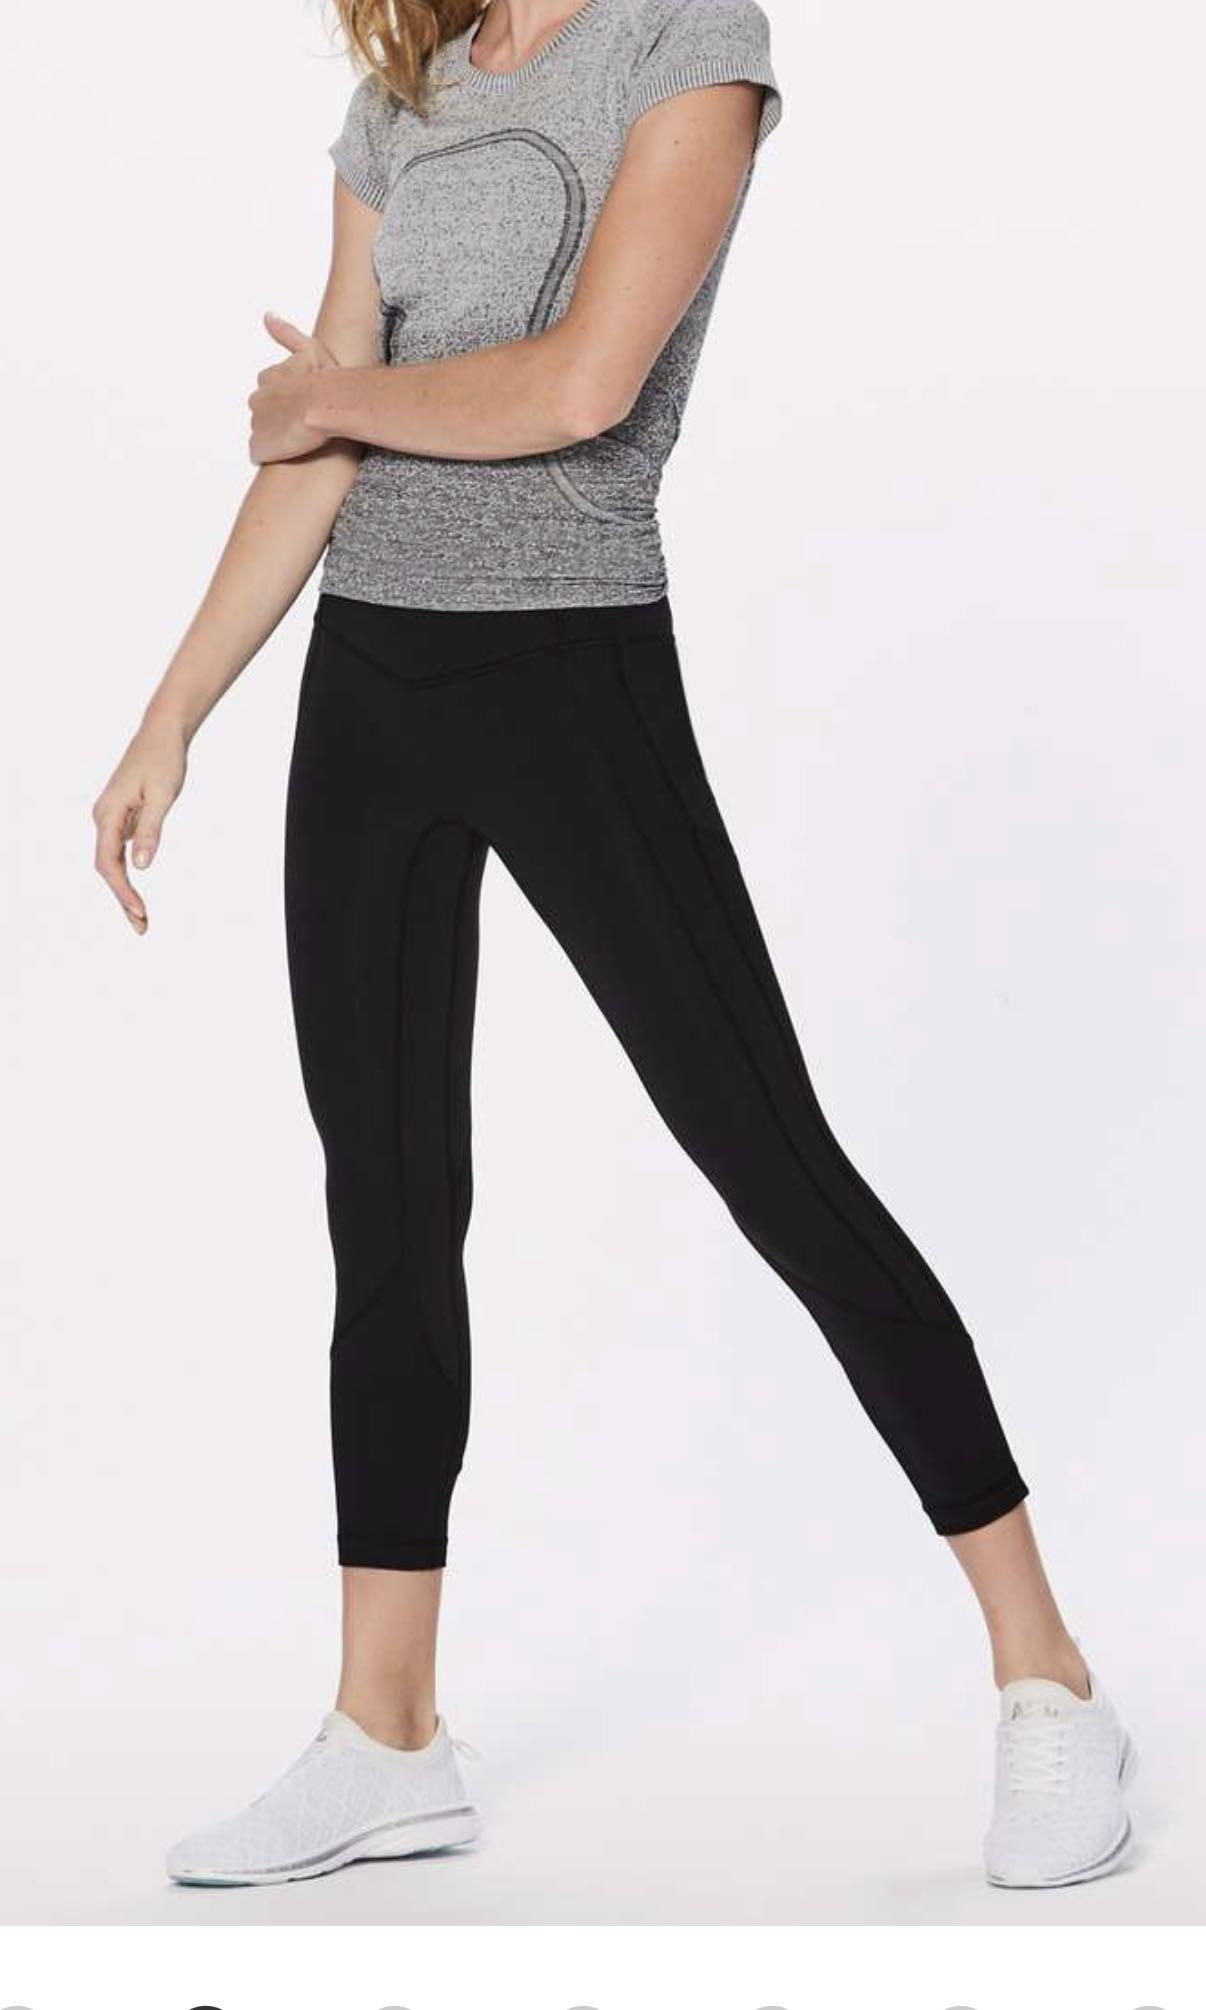 Lululemon All The Right Places Crop II Leggings Size 10 Luxtreme 23 Inseam